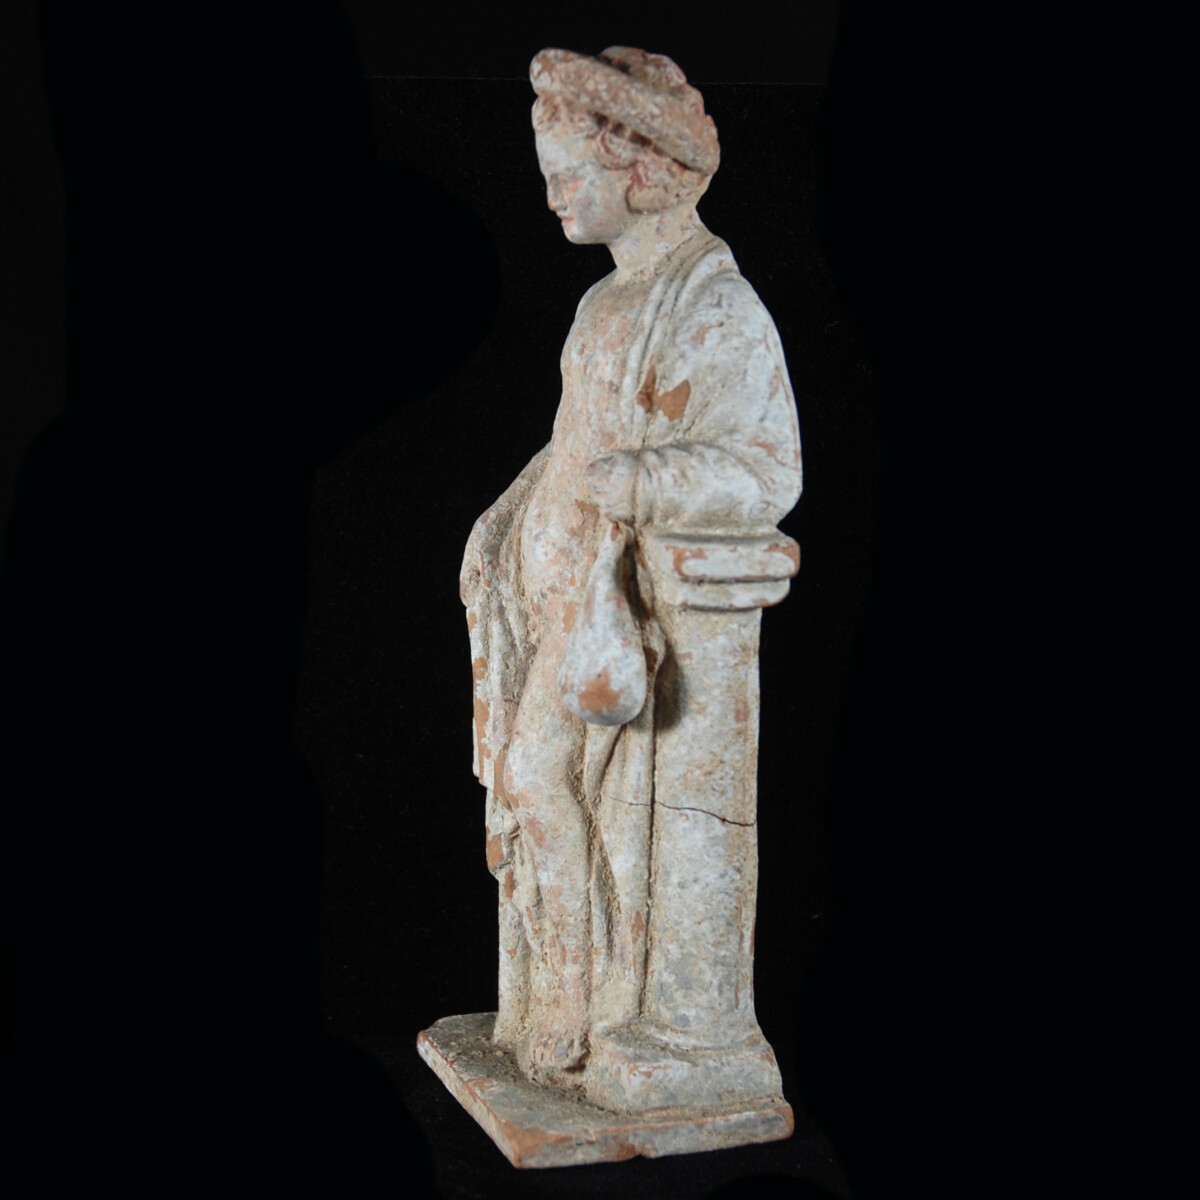 3 Tanagra statuette of a boy with money bag left